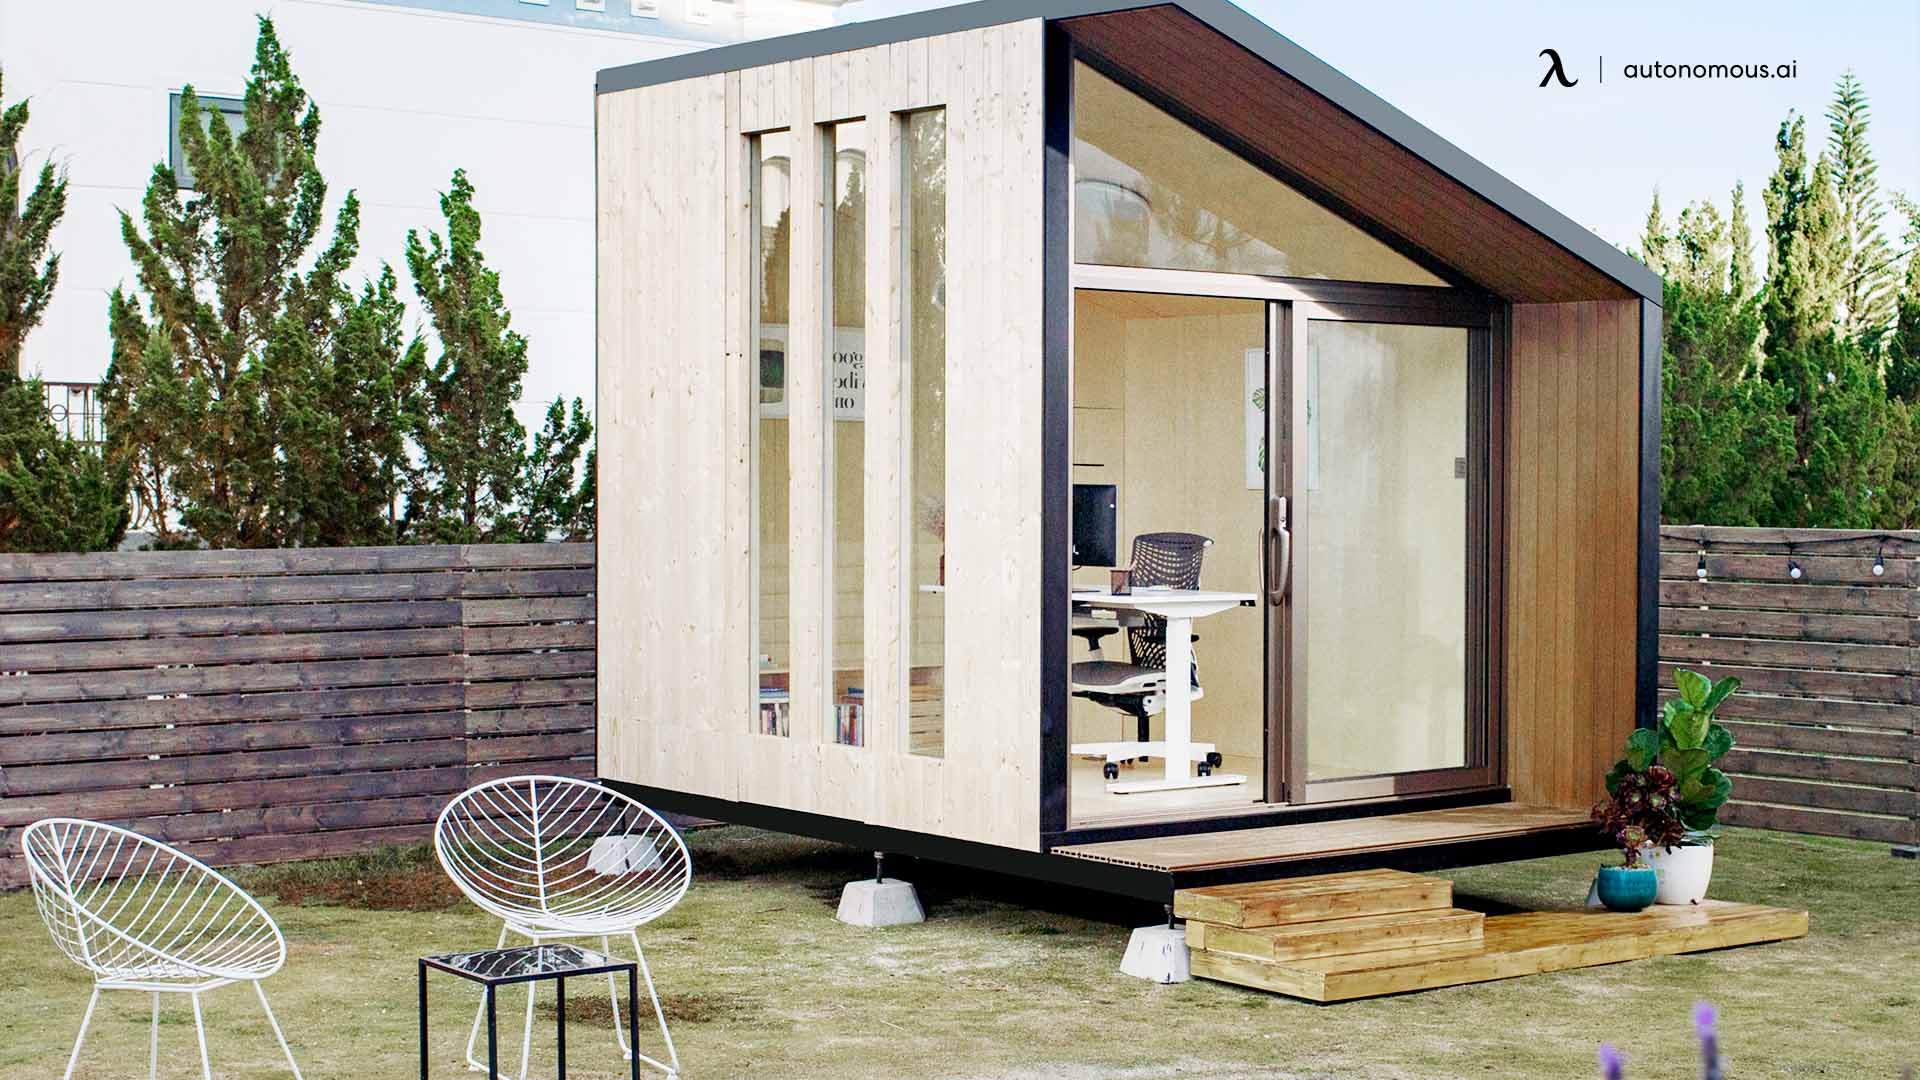 What are Prefab Cabins Used For?